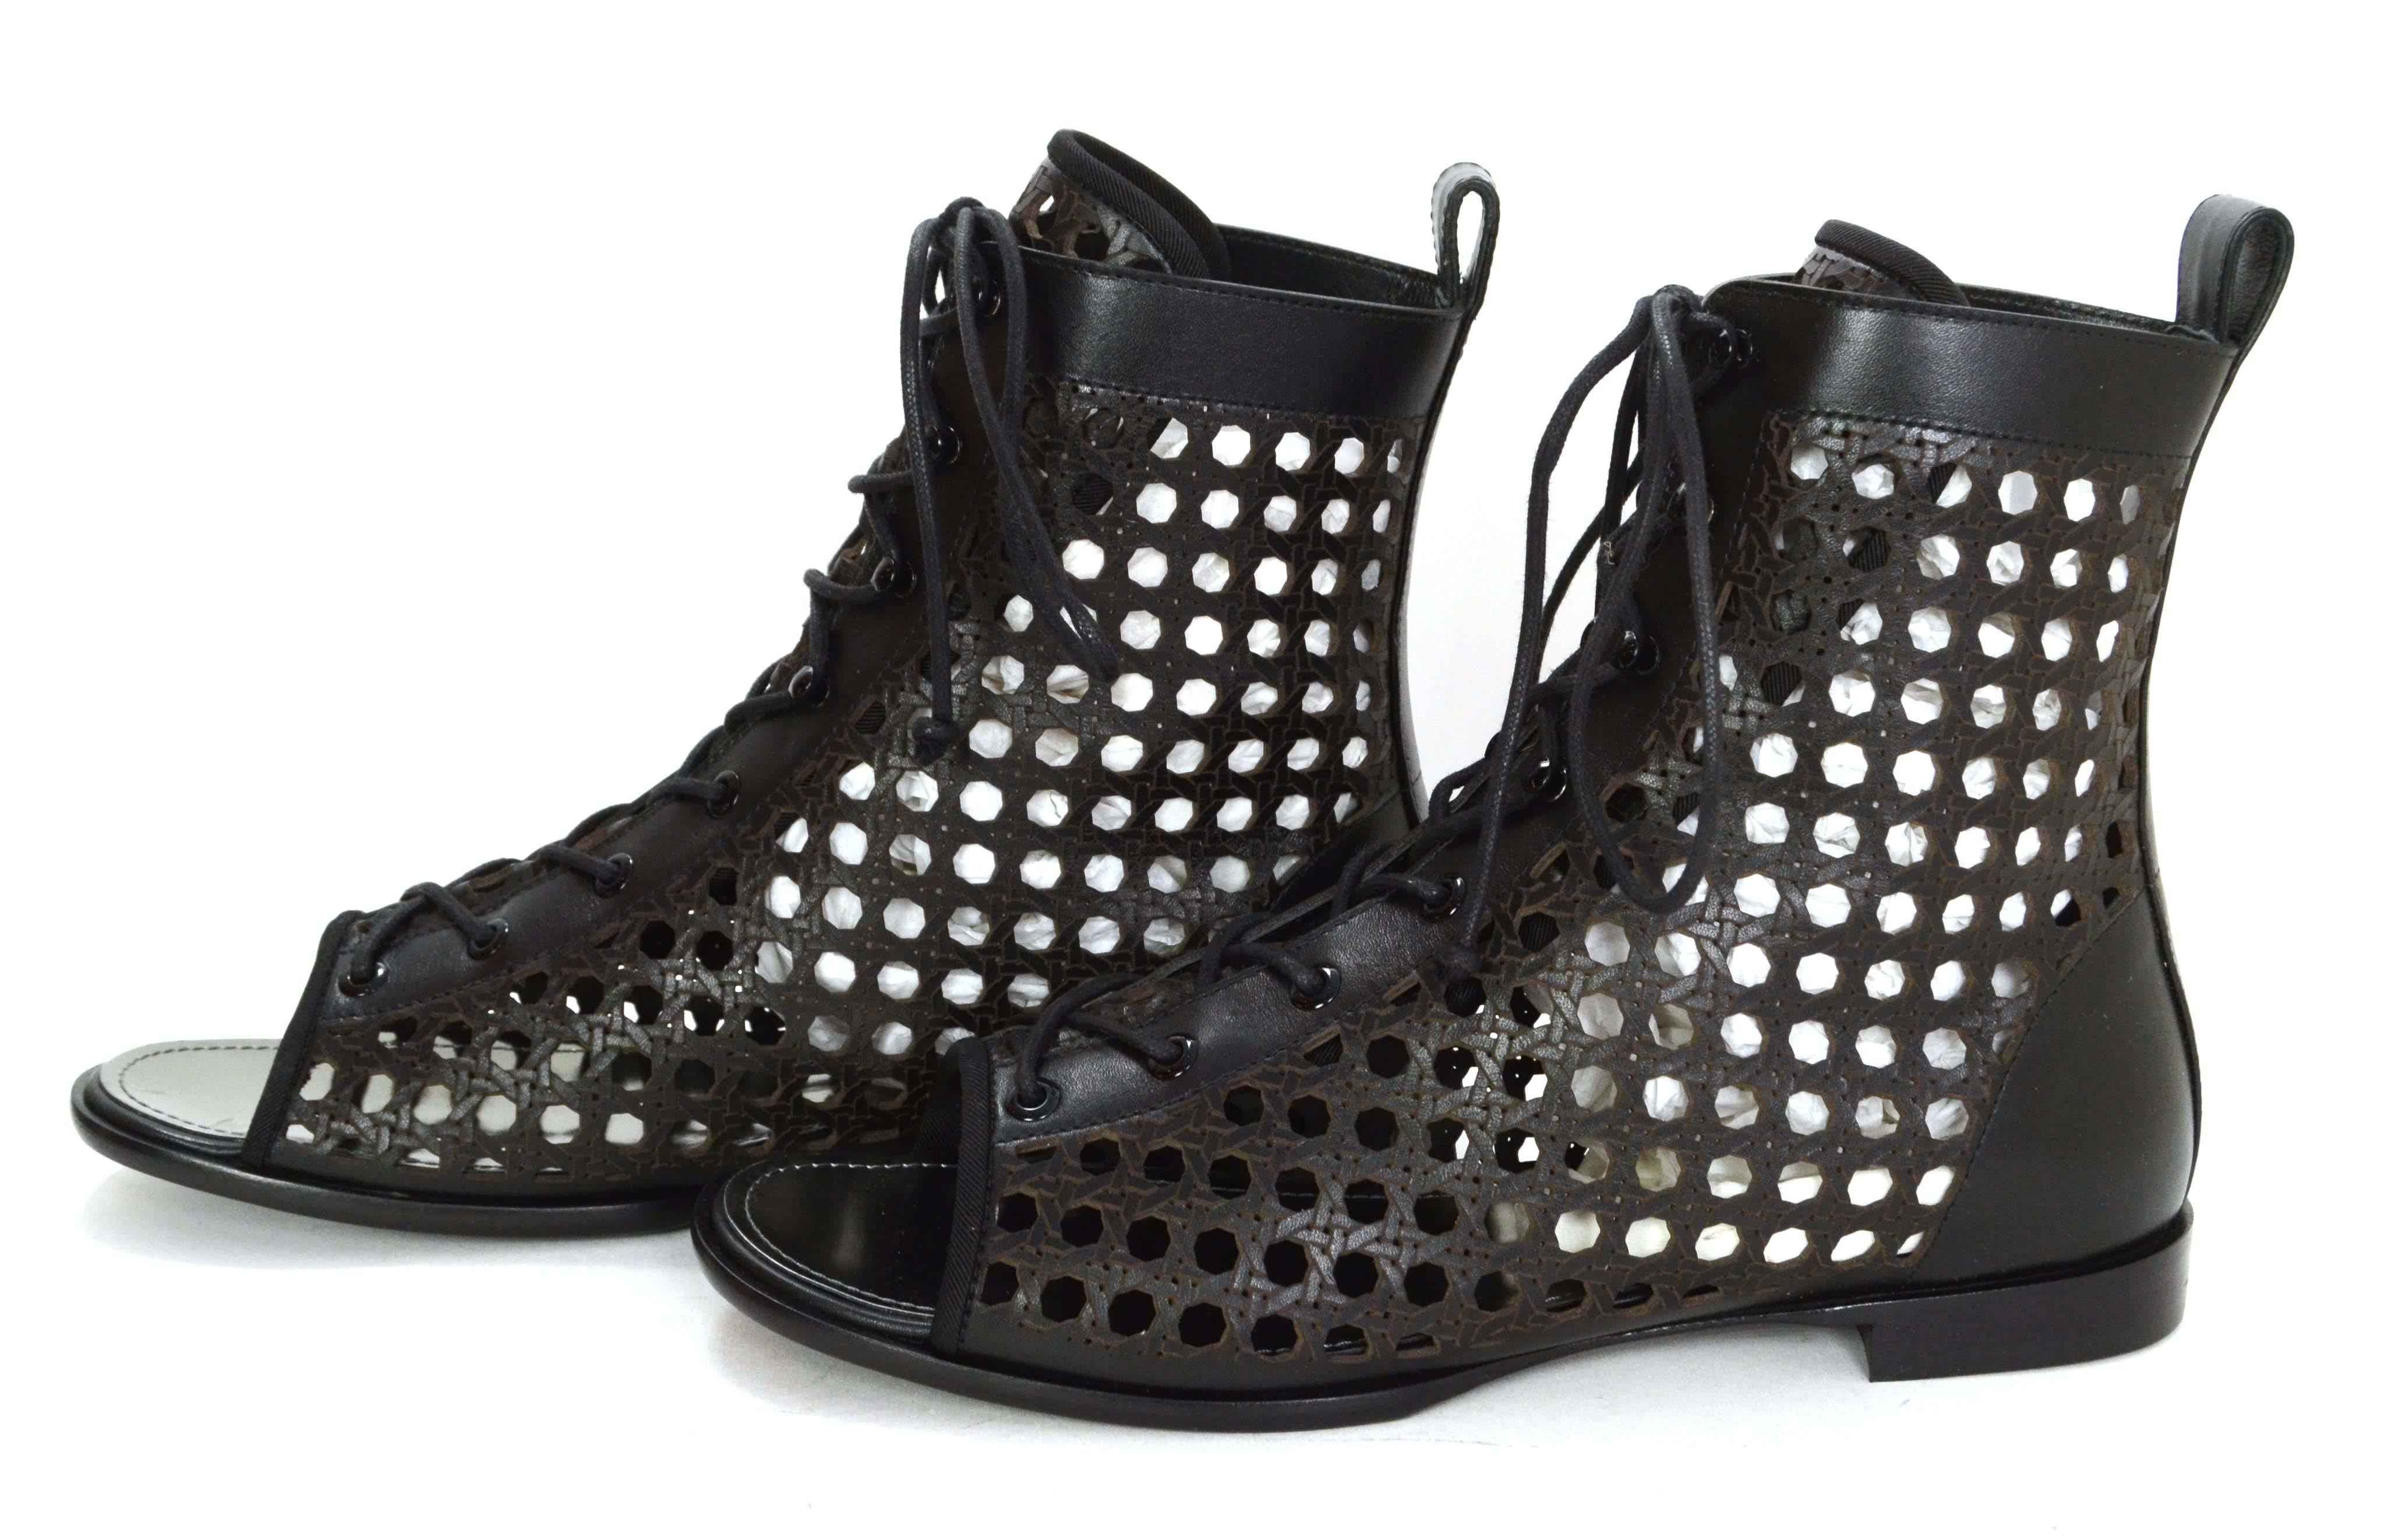 Proenza Schouler Black Perforated Open Toe Booties 
Features metallic silver leather insole
Made In: Italy
Color: Black
Materials: Leather
Closure/Opening: Lace up
Sole Stamp: Vero cuoio Made In Italy 39 1/2
Overall Condition: